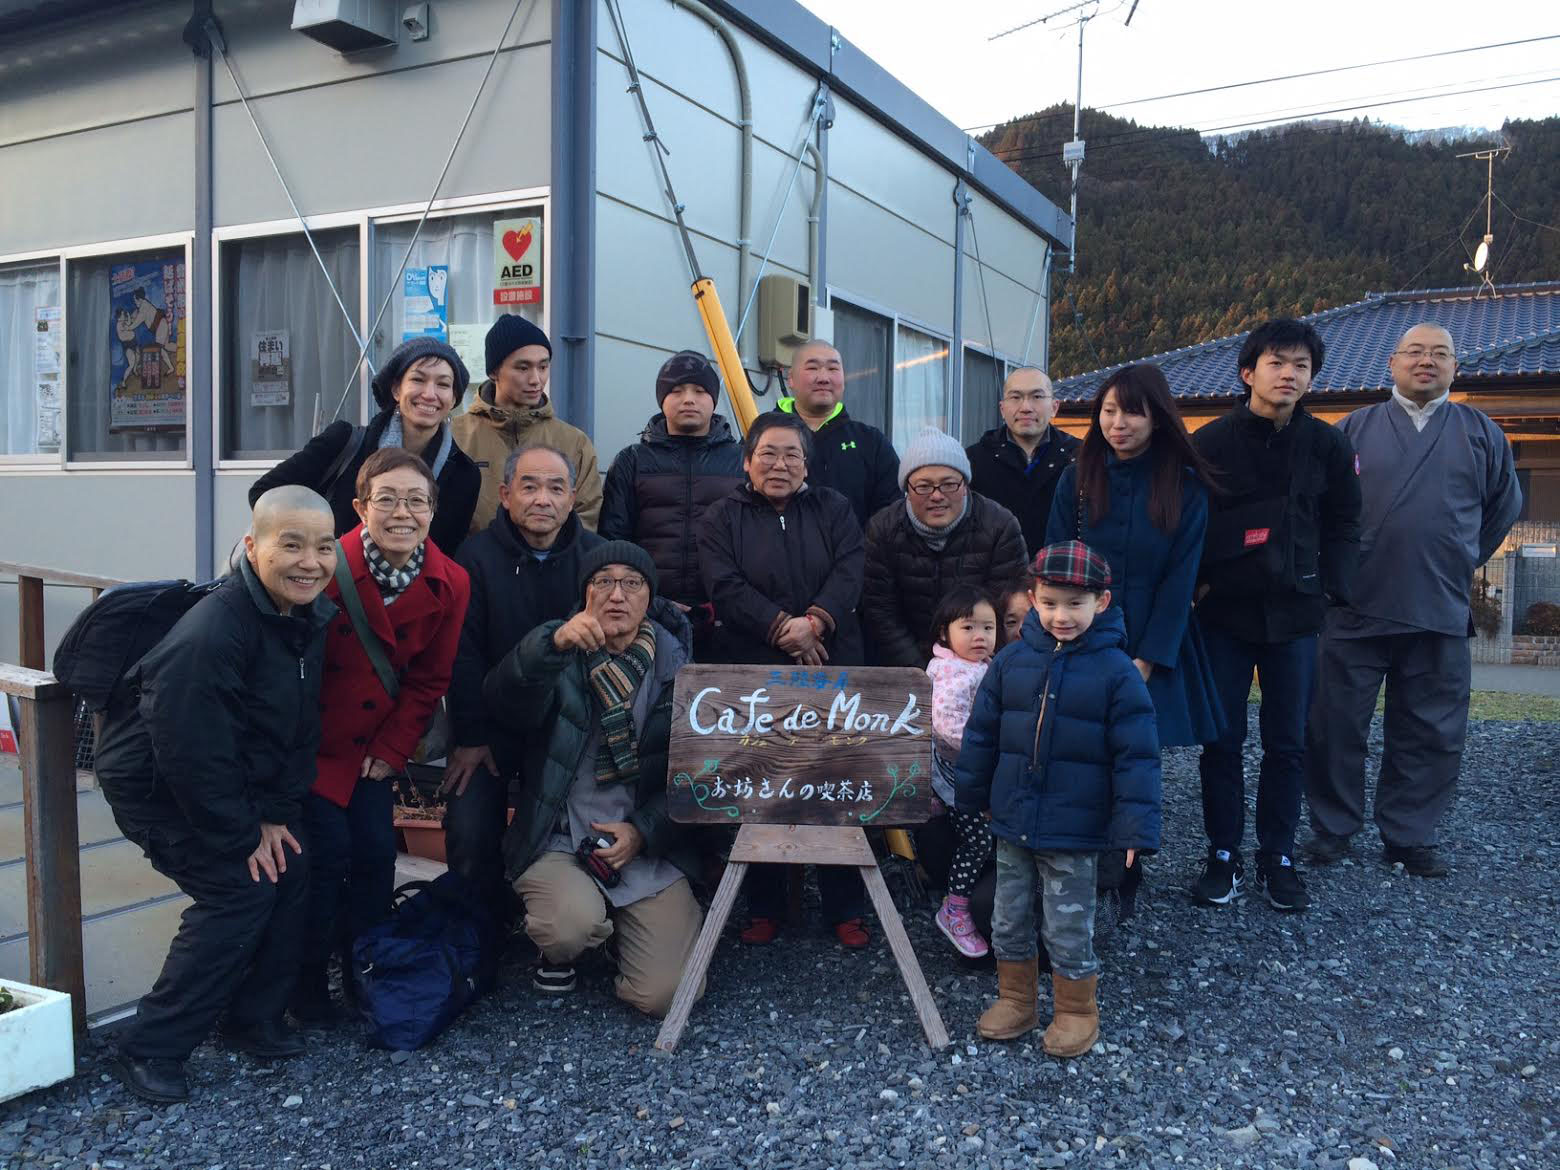 Broken but together: A photo outside Cafe De Monk in Minamisanriku's temporary-housing community after the 3/11 disaster. Mockett's son Ewan stands in front of various people in Mockett's book, 'Where the Dead Pause, and the Japanese say Goodbye.' Mockett herself is at the back on the far left, standing behind her mother. | MARIE MUTSUKI MOCKETT